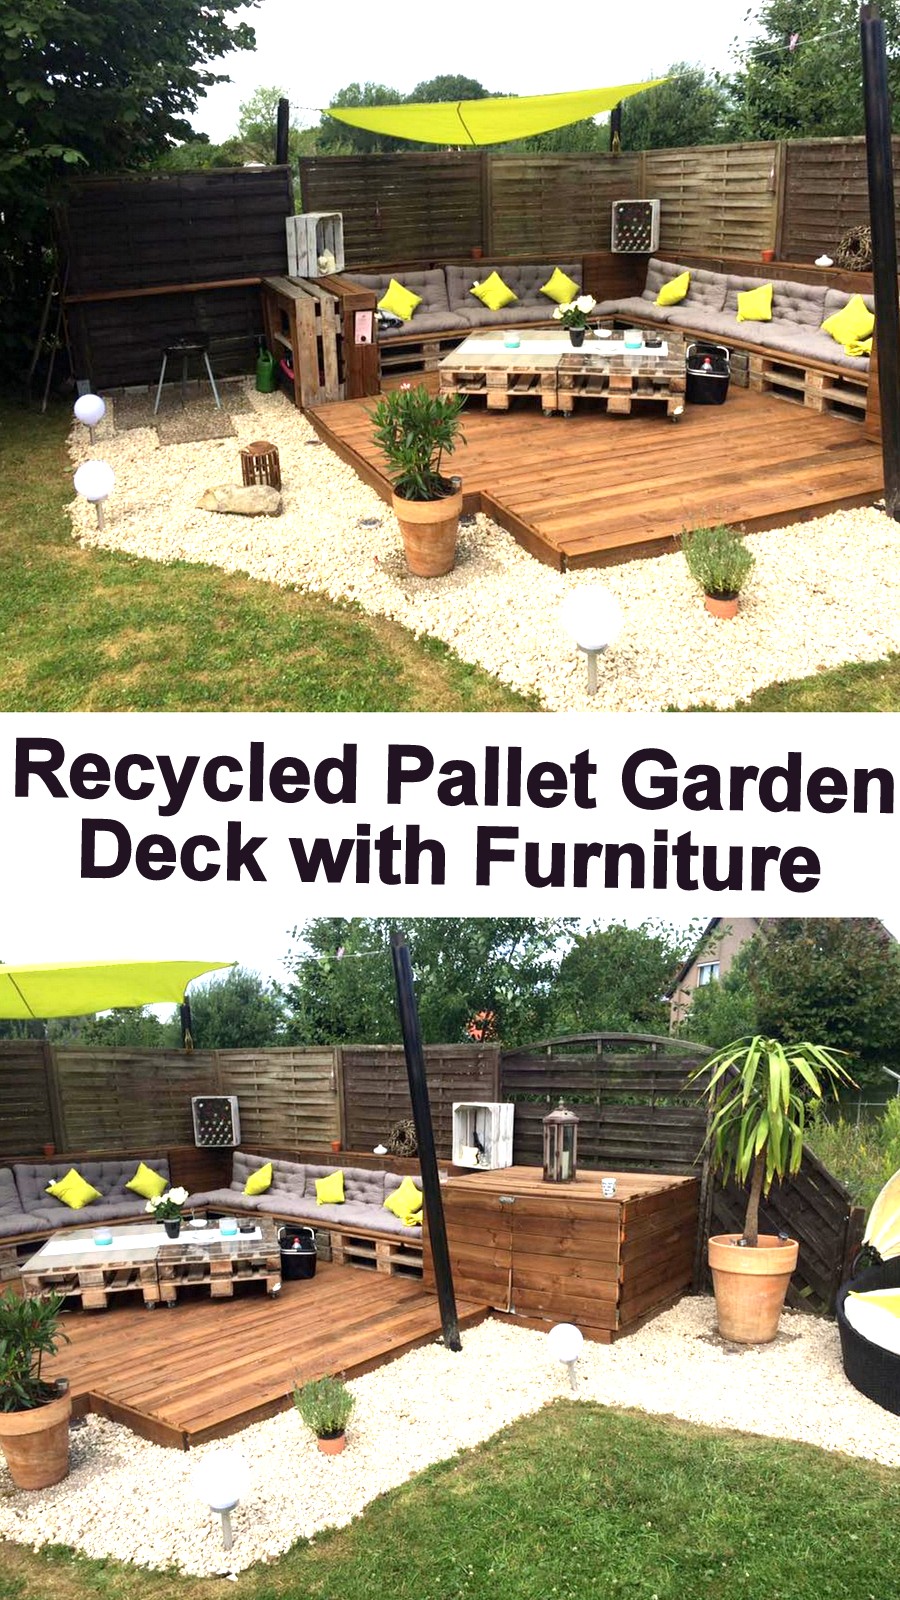  Recycled  Pallet  Garden Deck with Furniture  Pallet  Ideas 